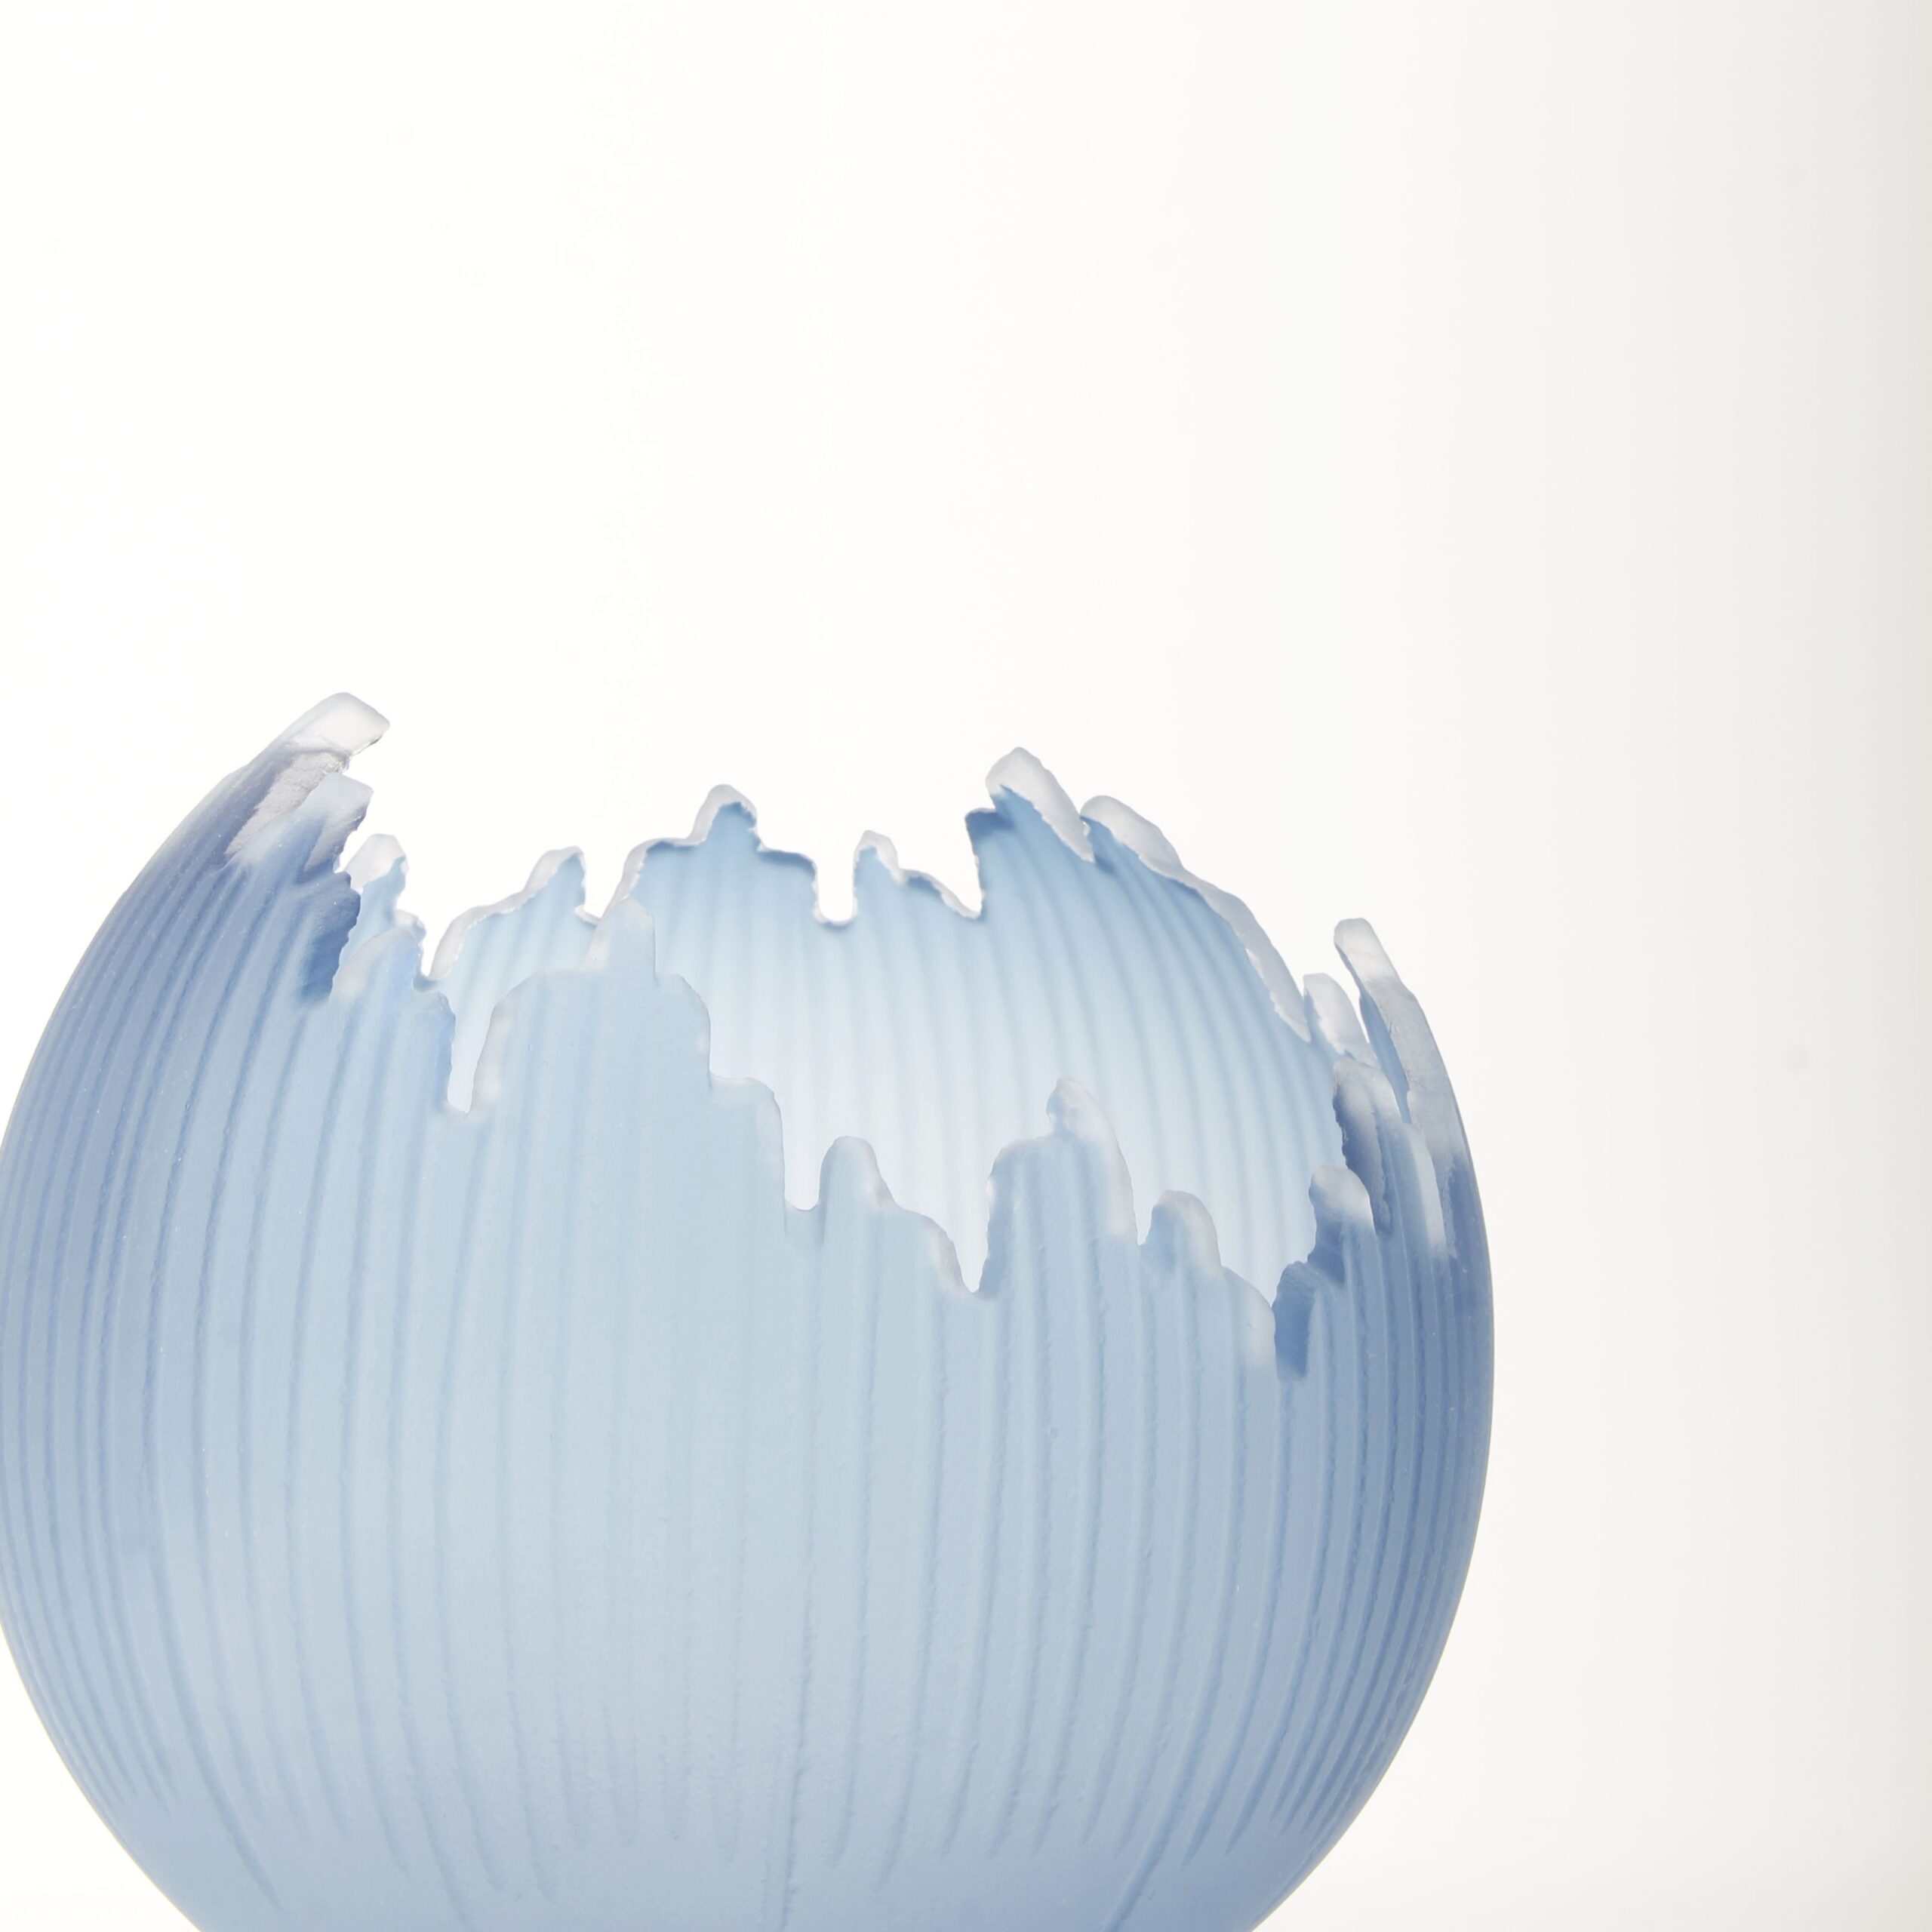 Courtney Downman: Steel Blue Carved Glass Orb Product Image 2 of 2